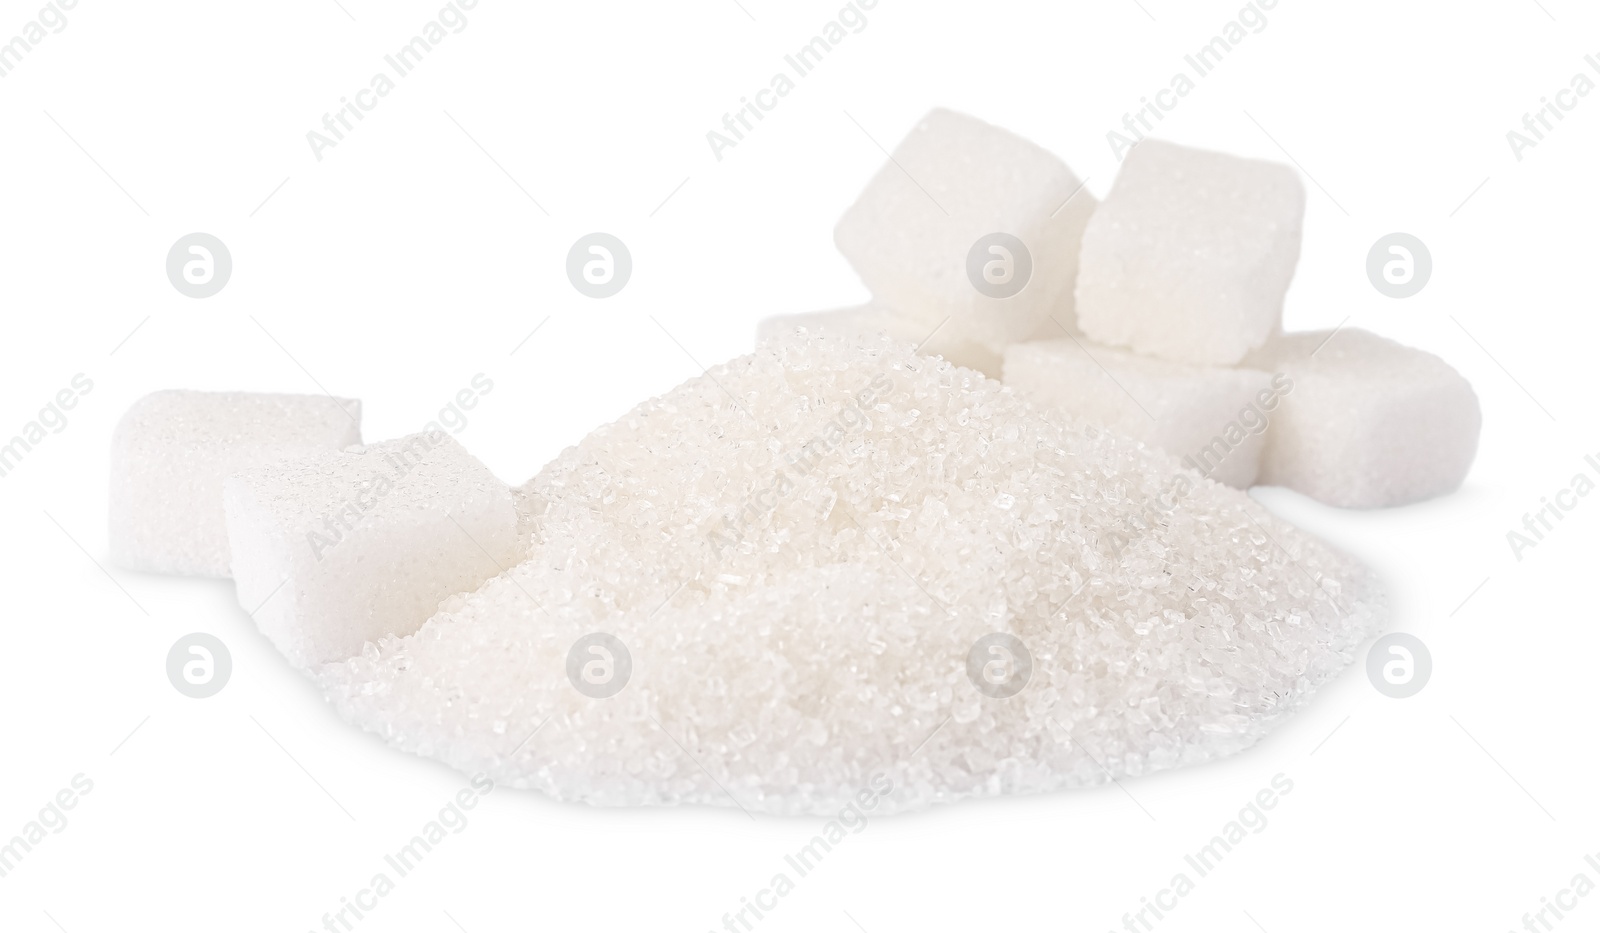 Photo of Granulated and cubed sugar isolated on white